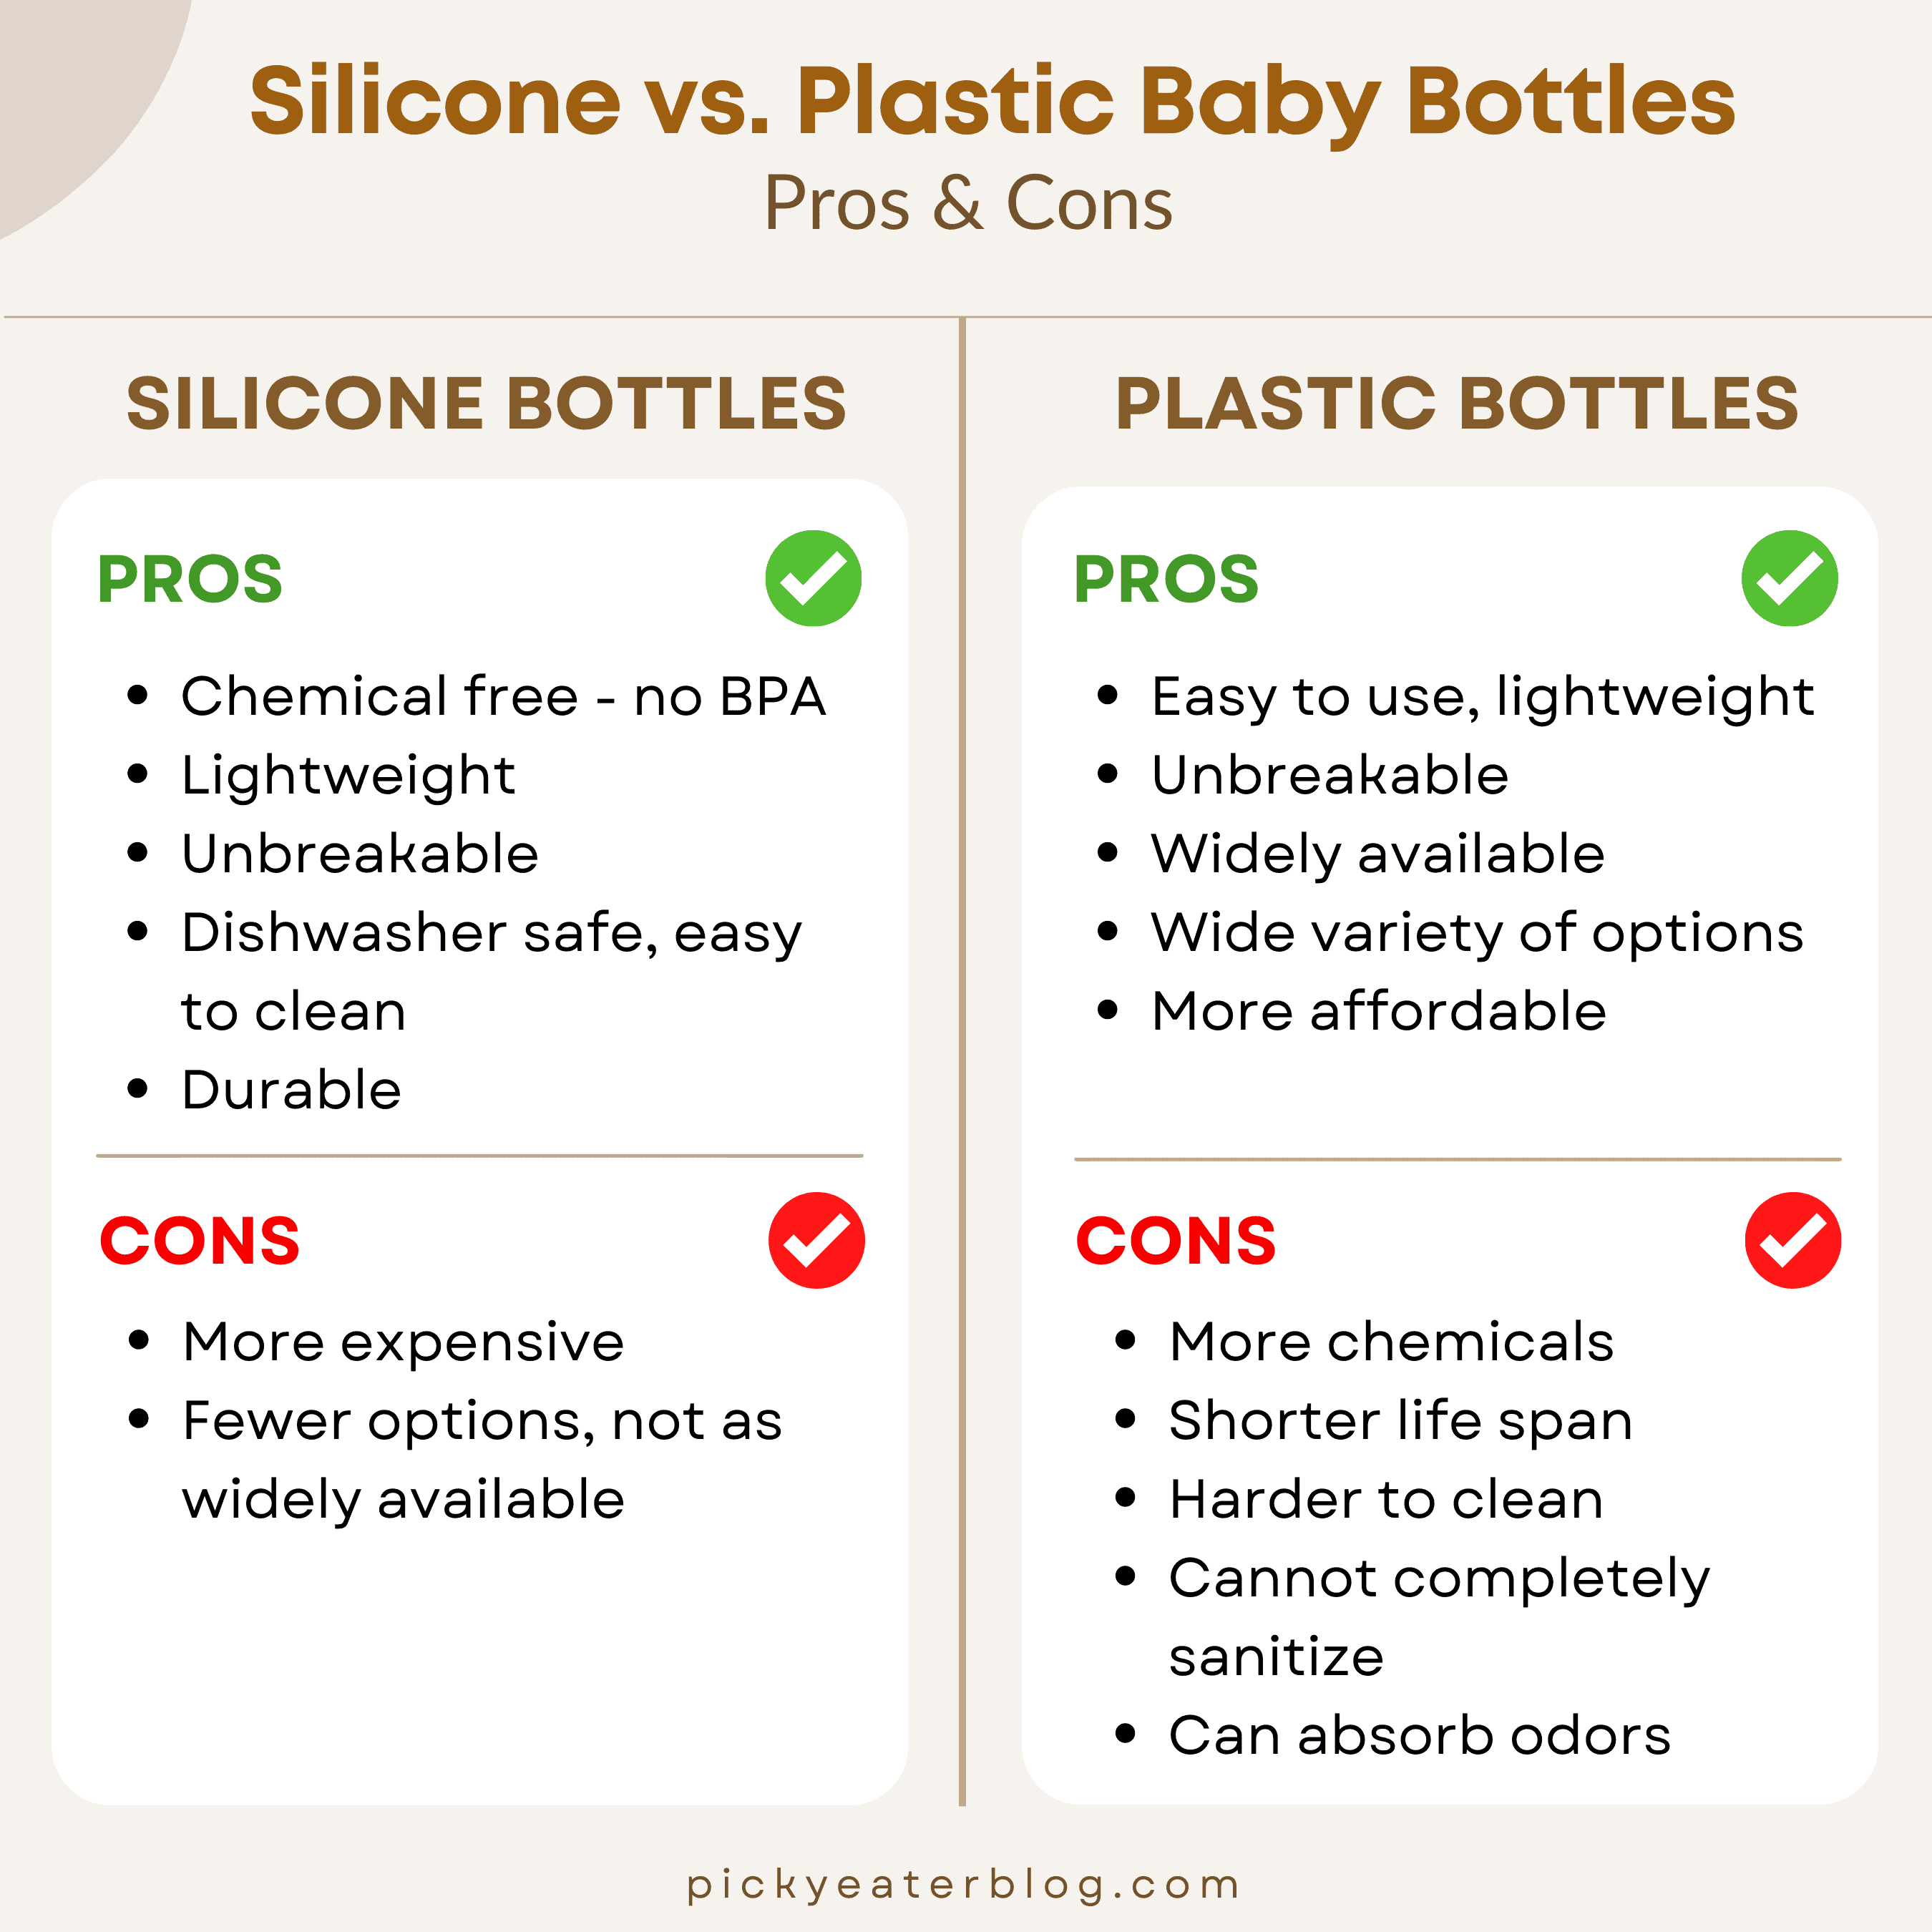 Silicone vs. Plastic Baby Bottles Infographic (Pros & Cons).